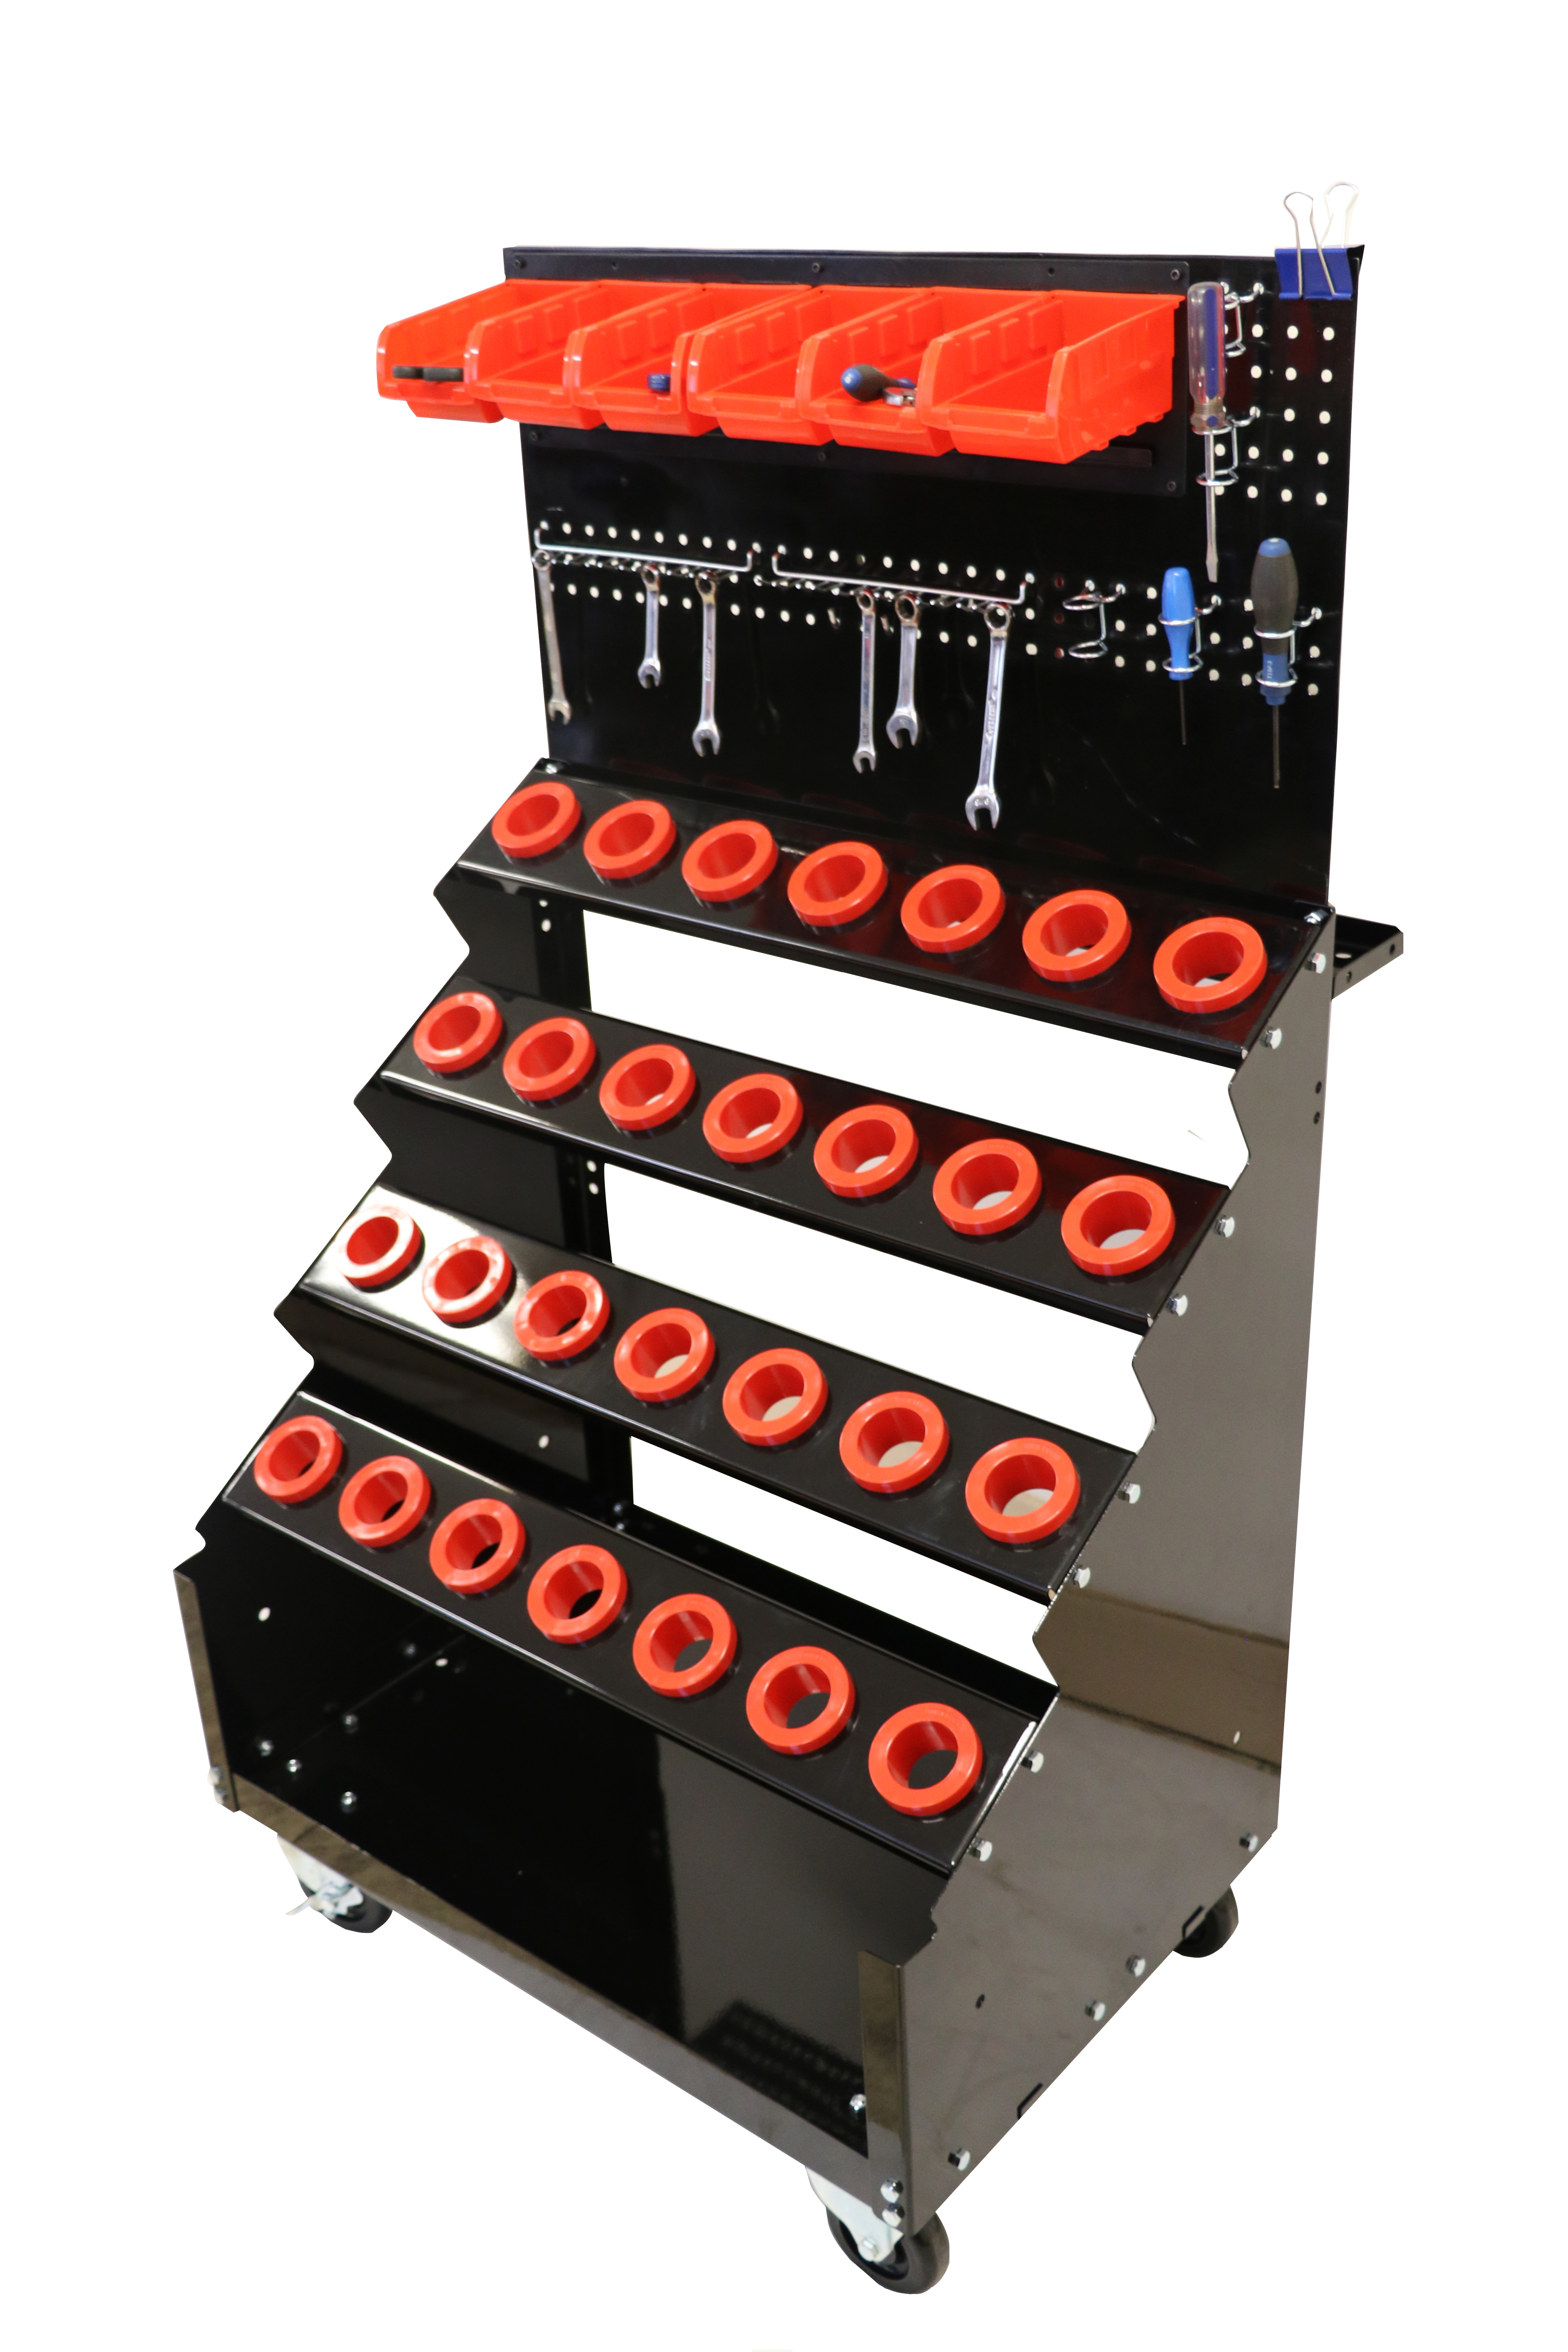 Get the Affordable CAT 40 CNC Tool Holder carts from Uratech USA